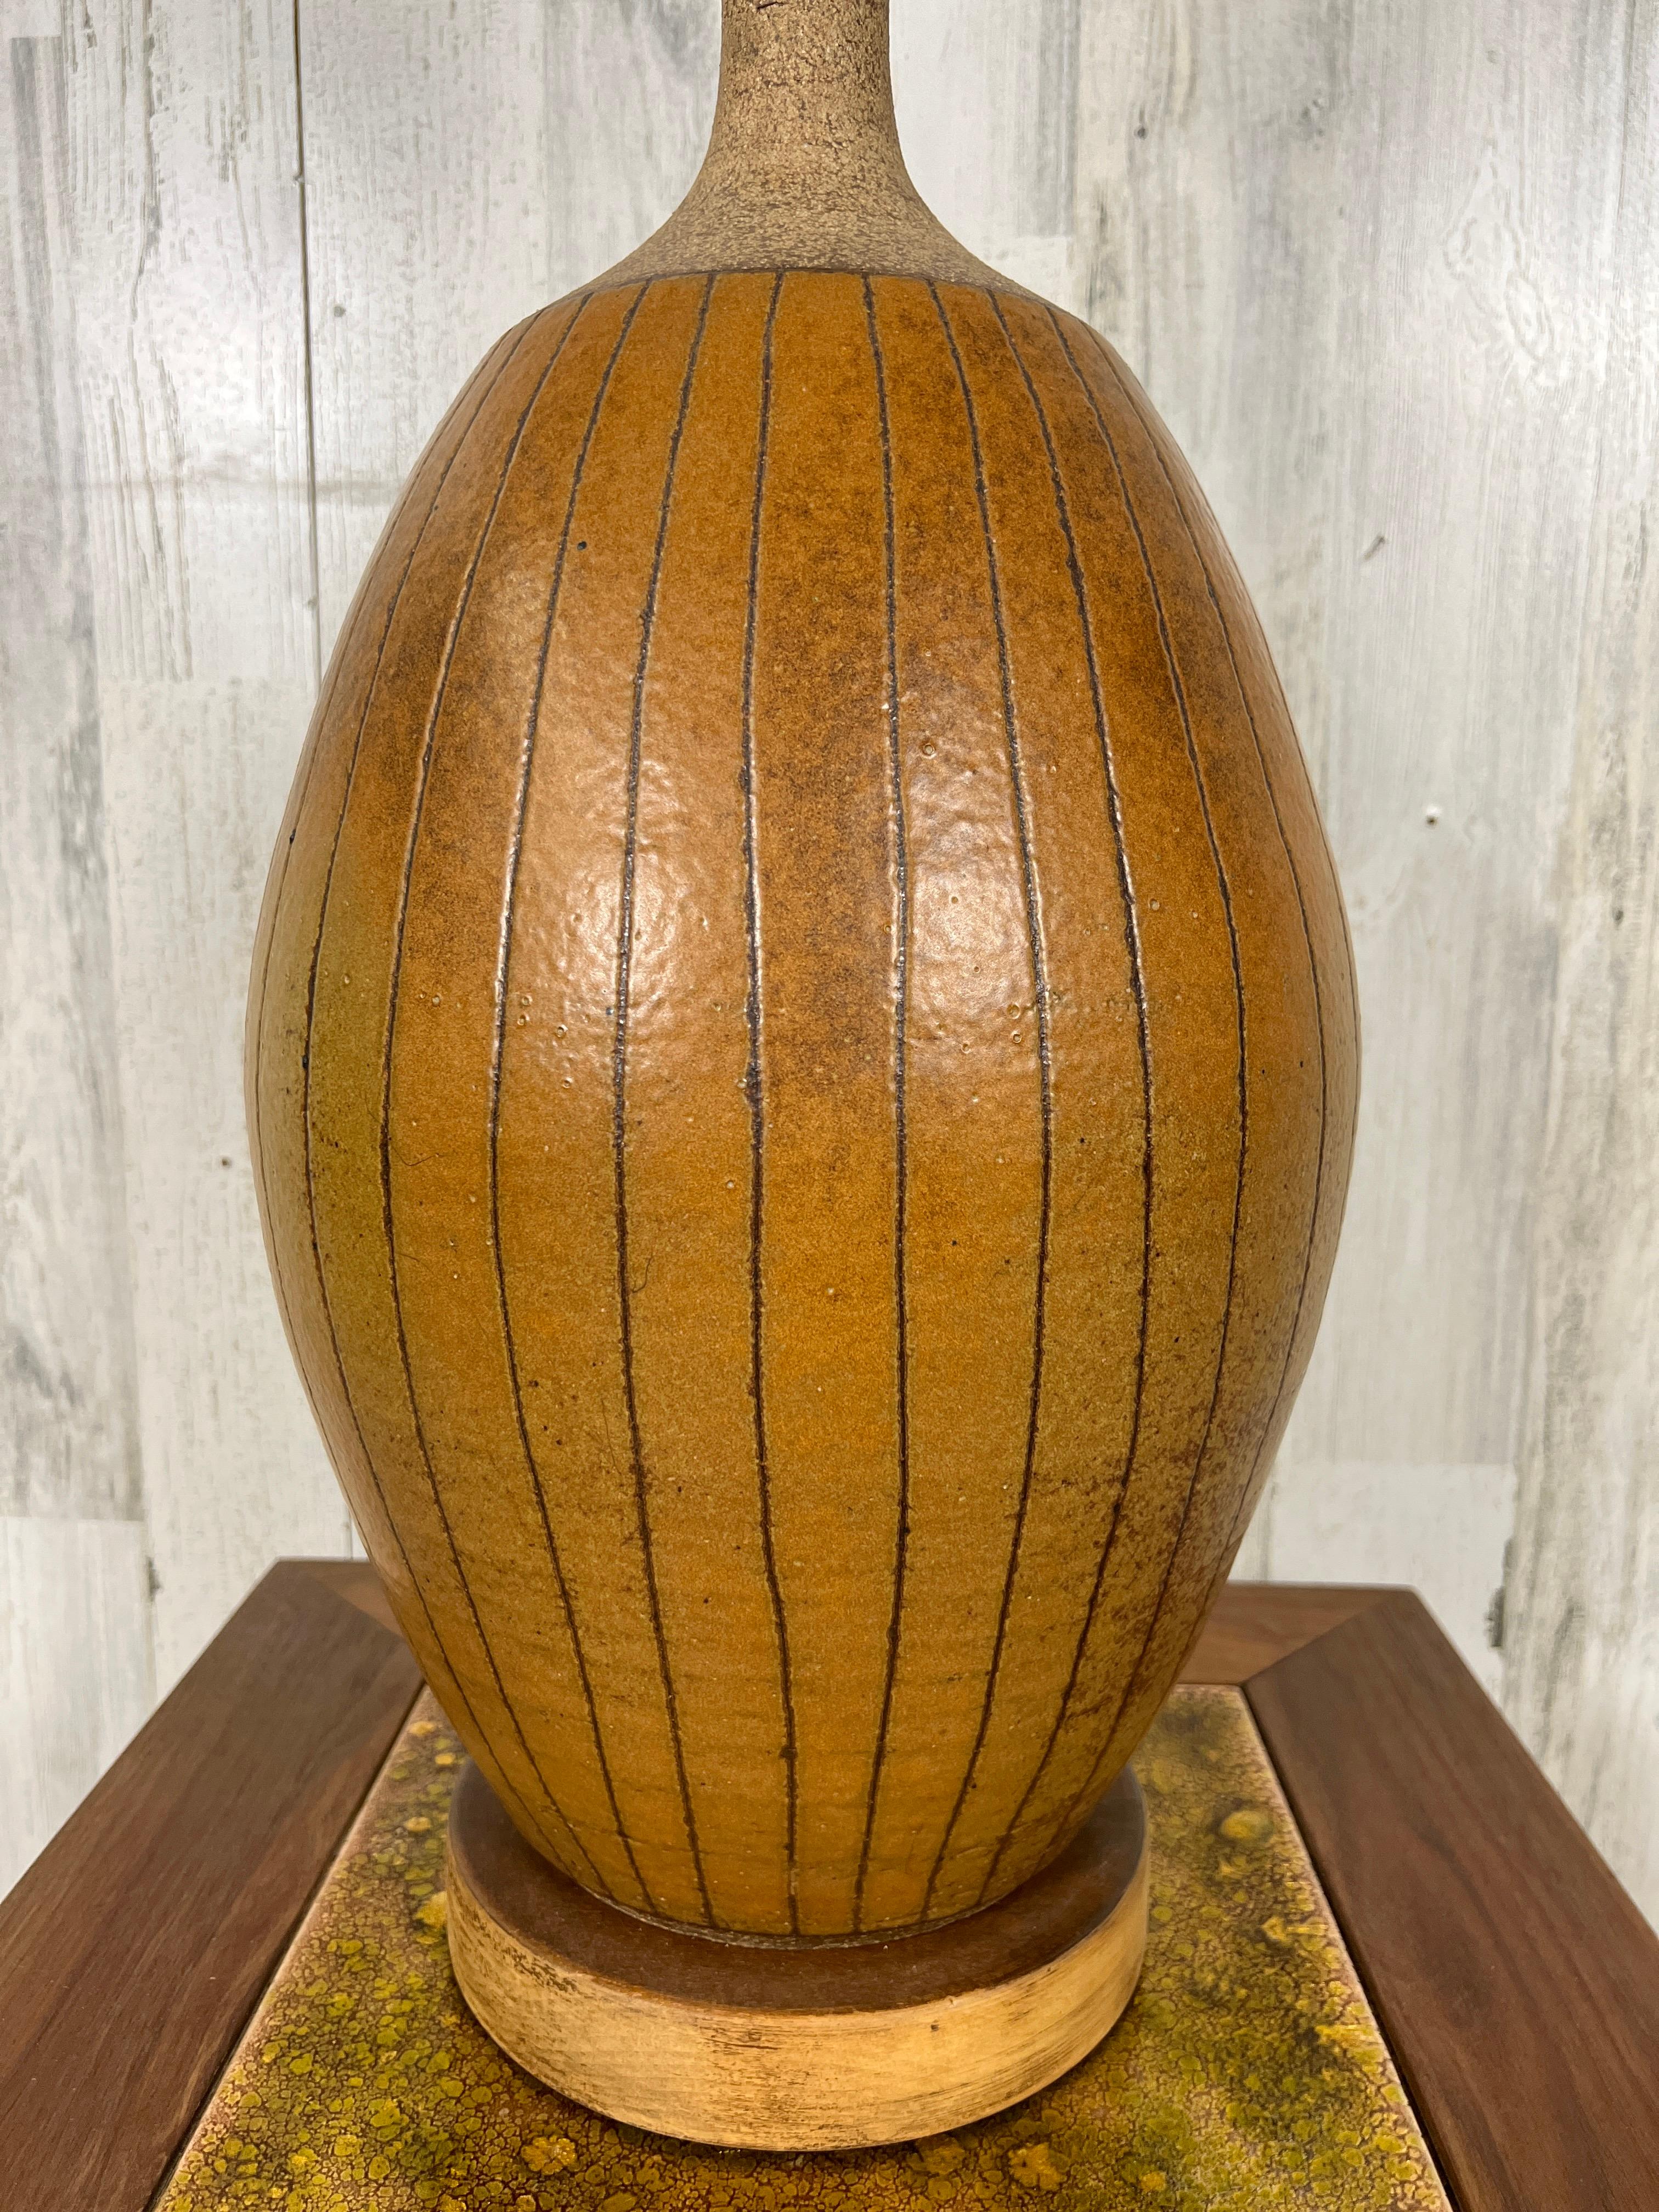 1960s, ceramic table lamp by Brent Bennett with wood base 
The base is 11